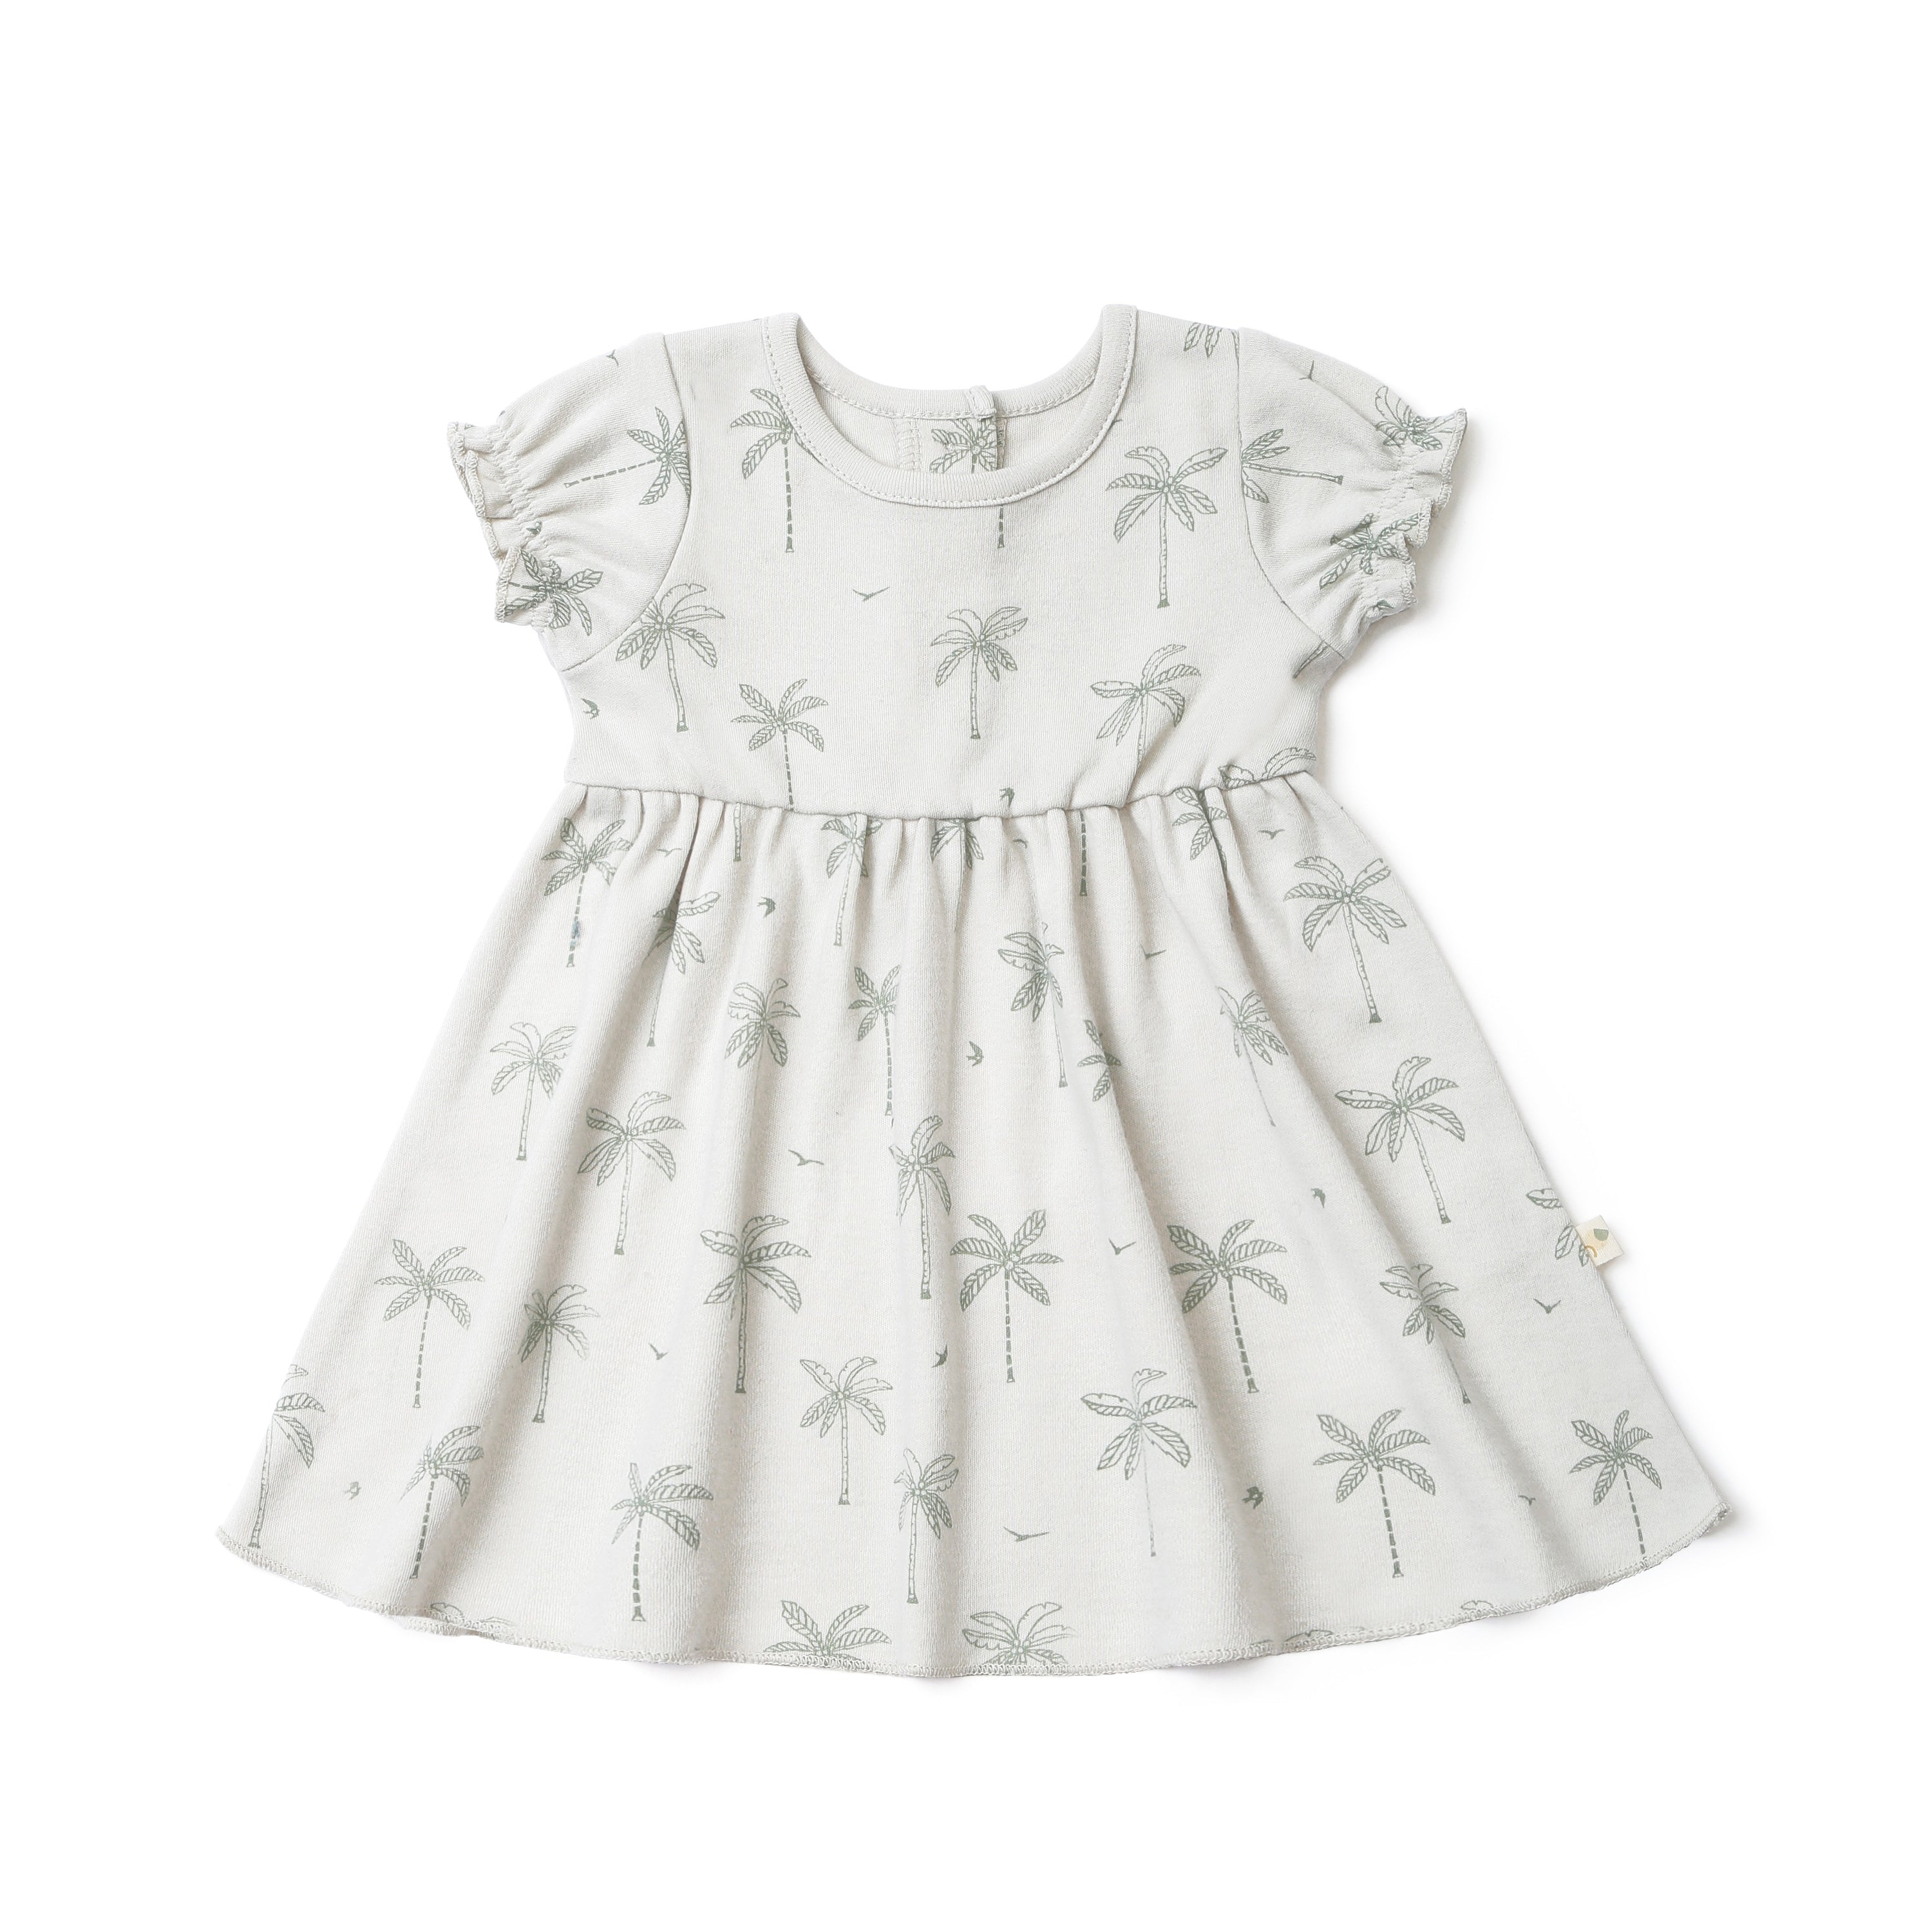 A toddler's Organic Puff Sleeve Dress - Tropical from Organic Kids with a flared skirt featuring a subtle palm tree print, short puff sleeves, and a round neckline, displayed on a white background.